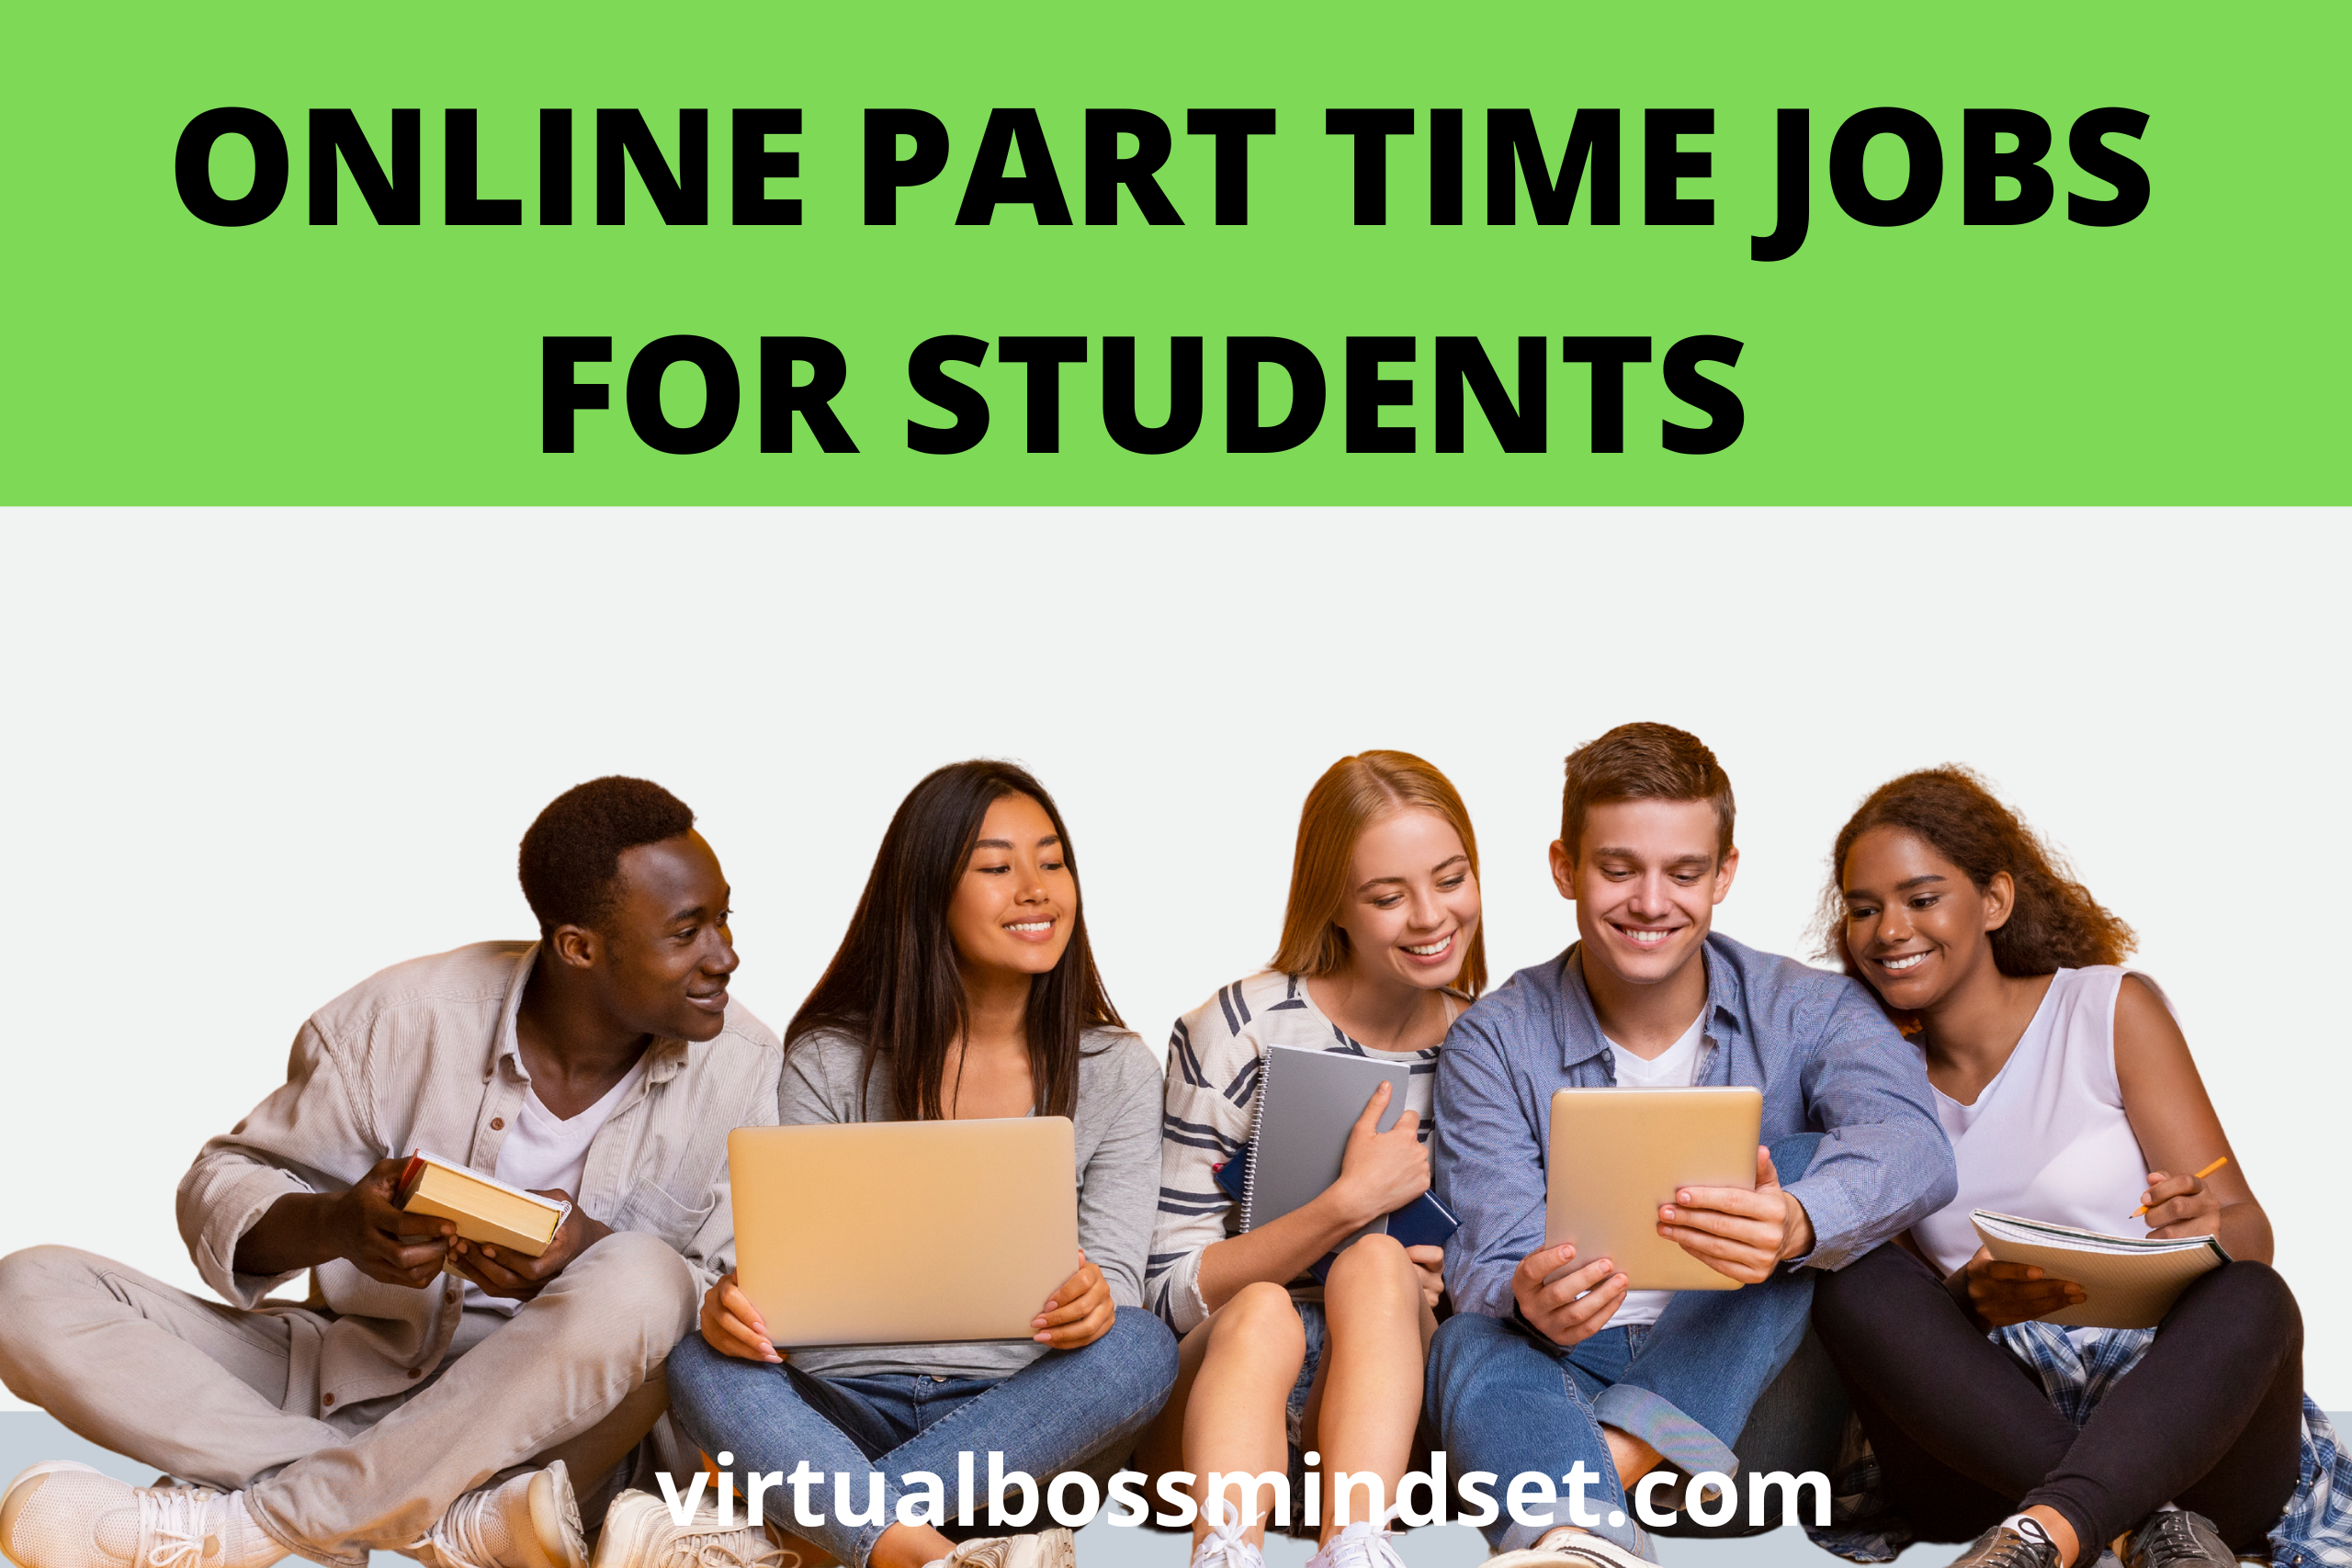 9 Online Part-Time Jobs for Students: How to Make Money While in College